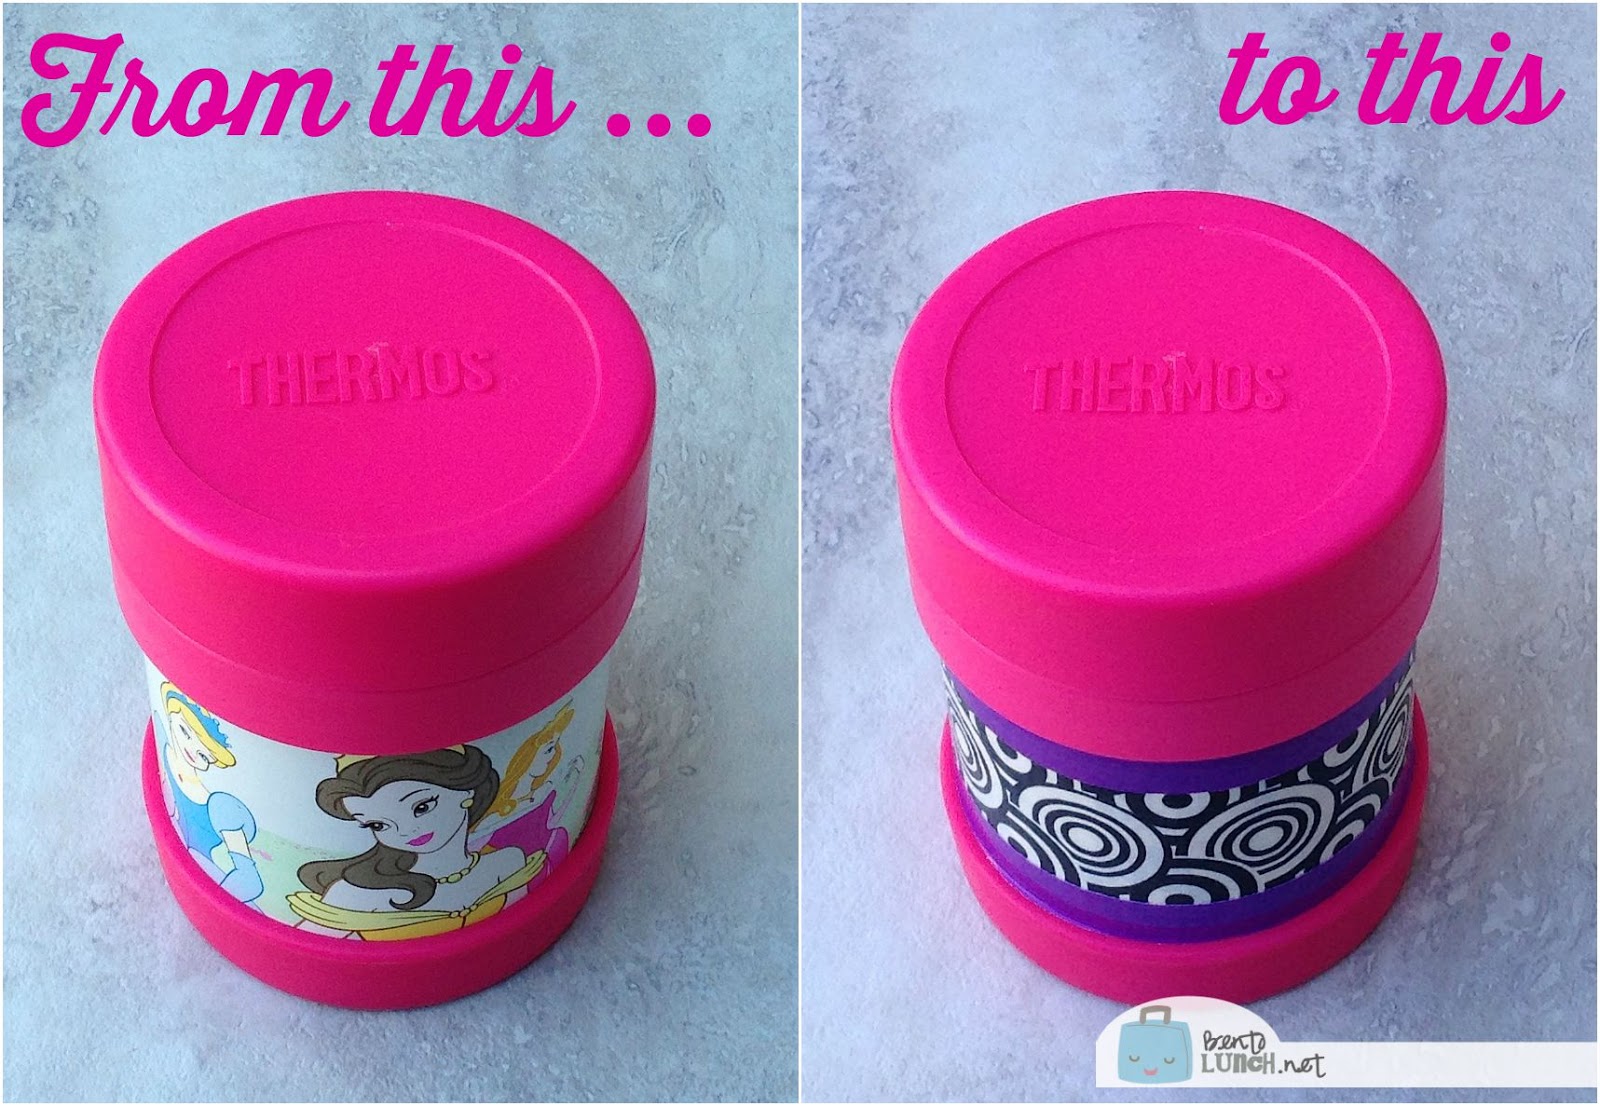 Thermos Funtainer: Does it hold up for your kids' lunch?